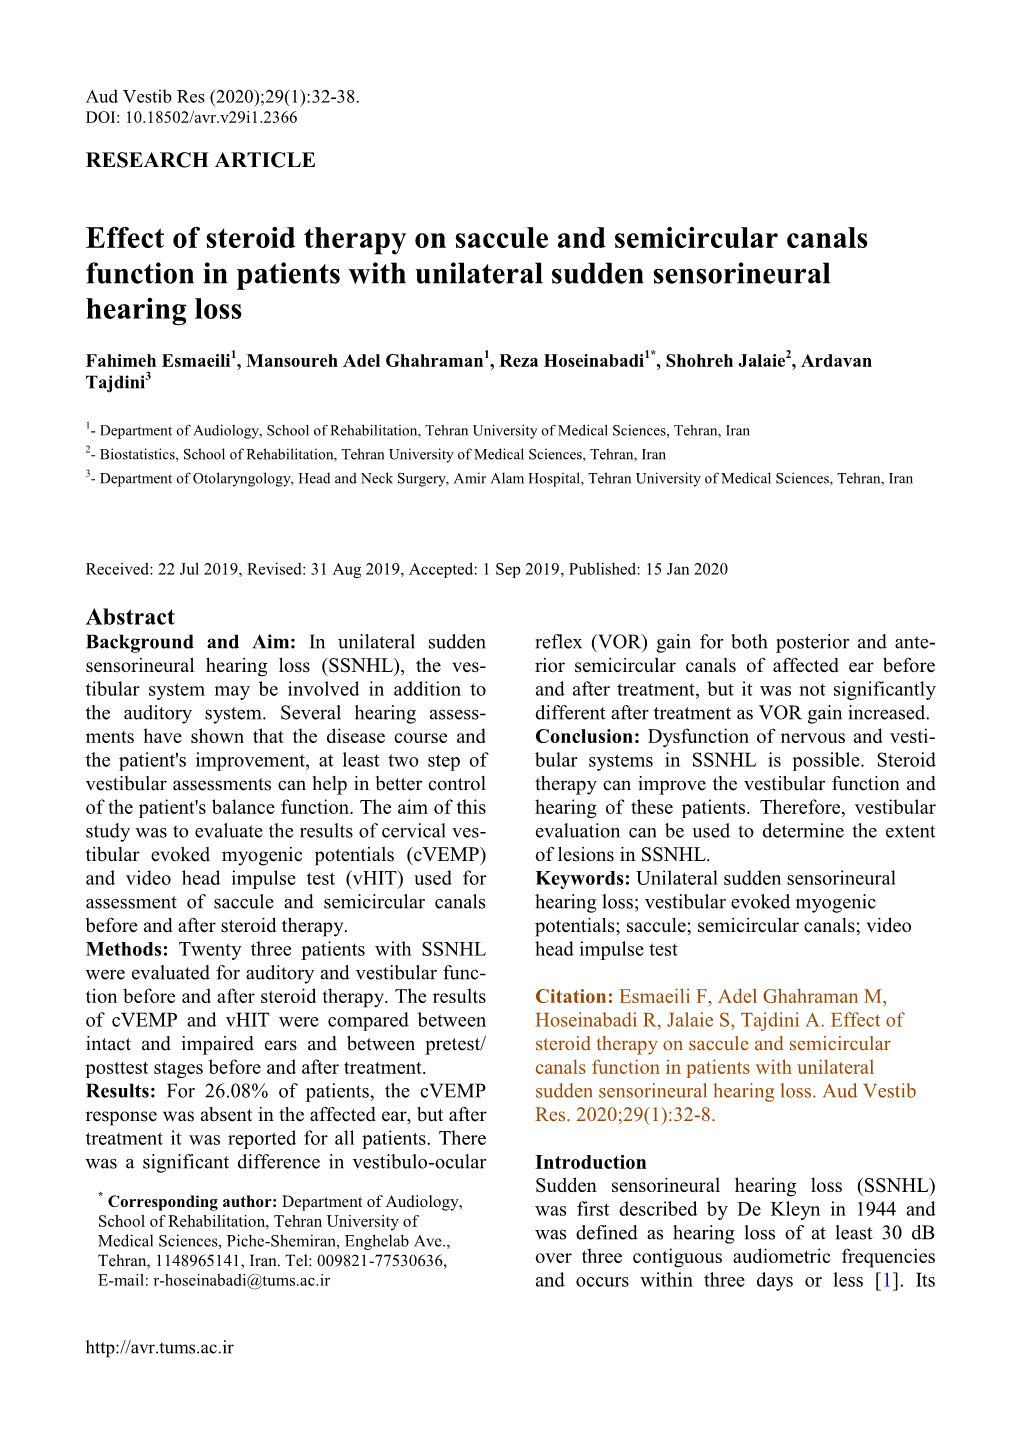 Effect of Steroid Therapy on Saccule and Semicircular Canals Function in Patients with Unilateral Sudden Sensorineural Hearing Loss